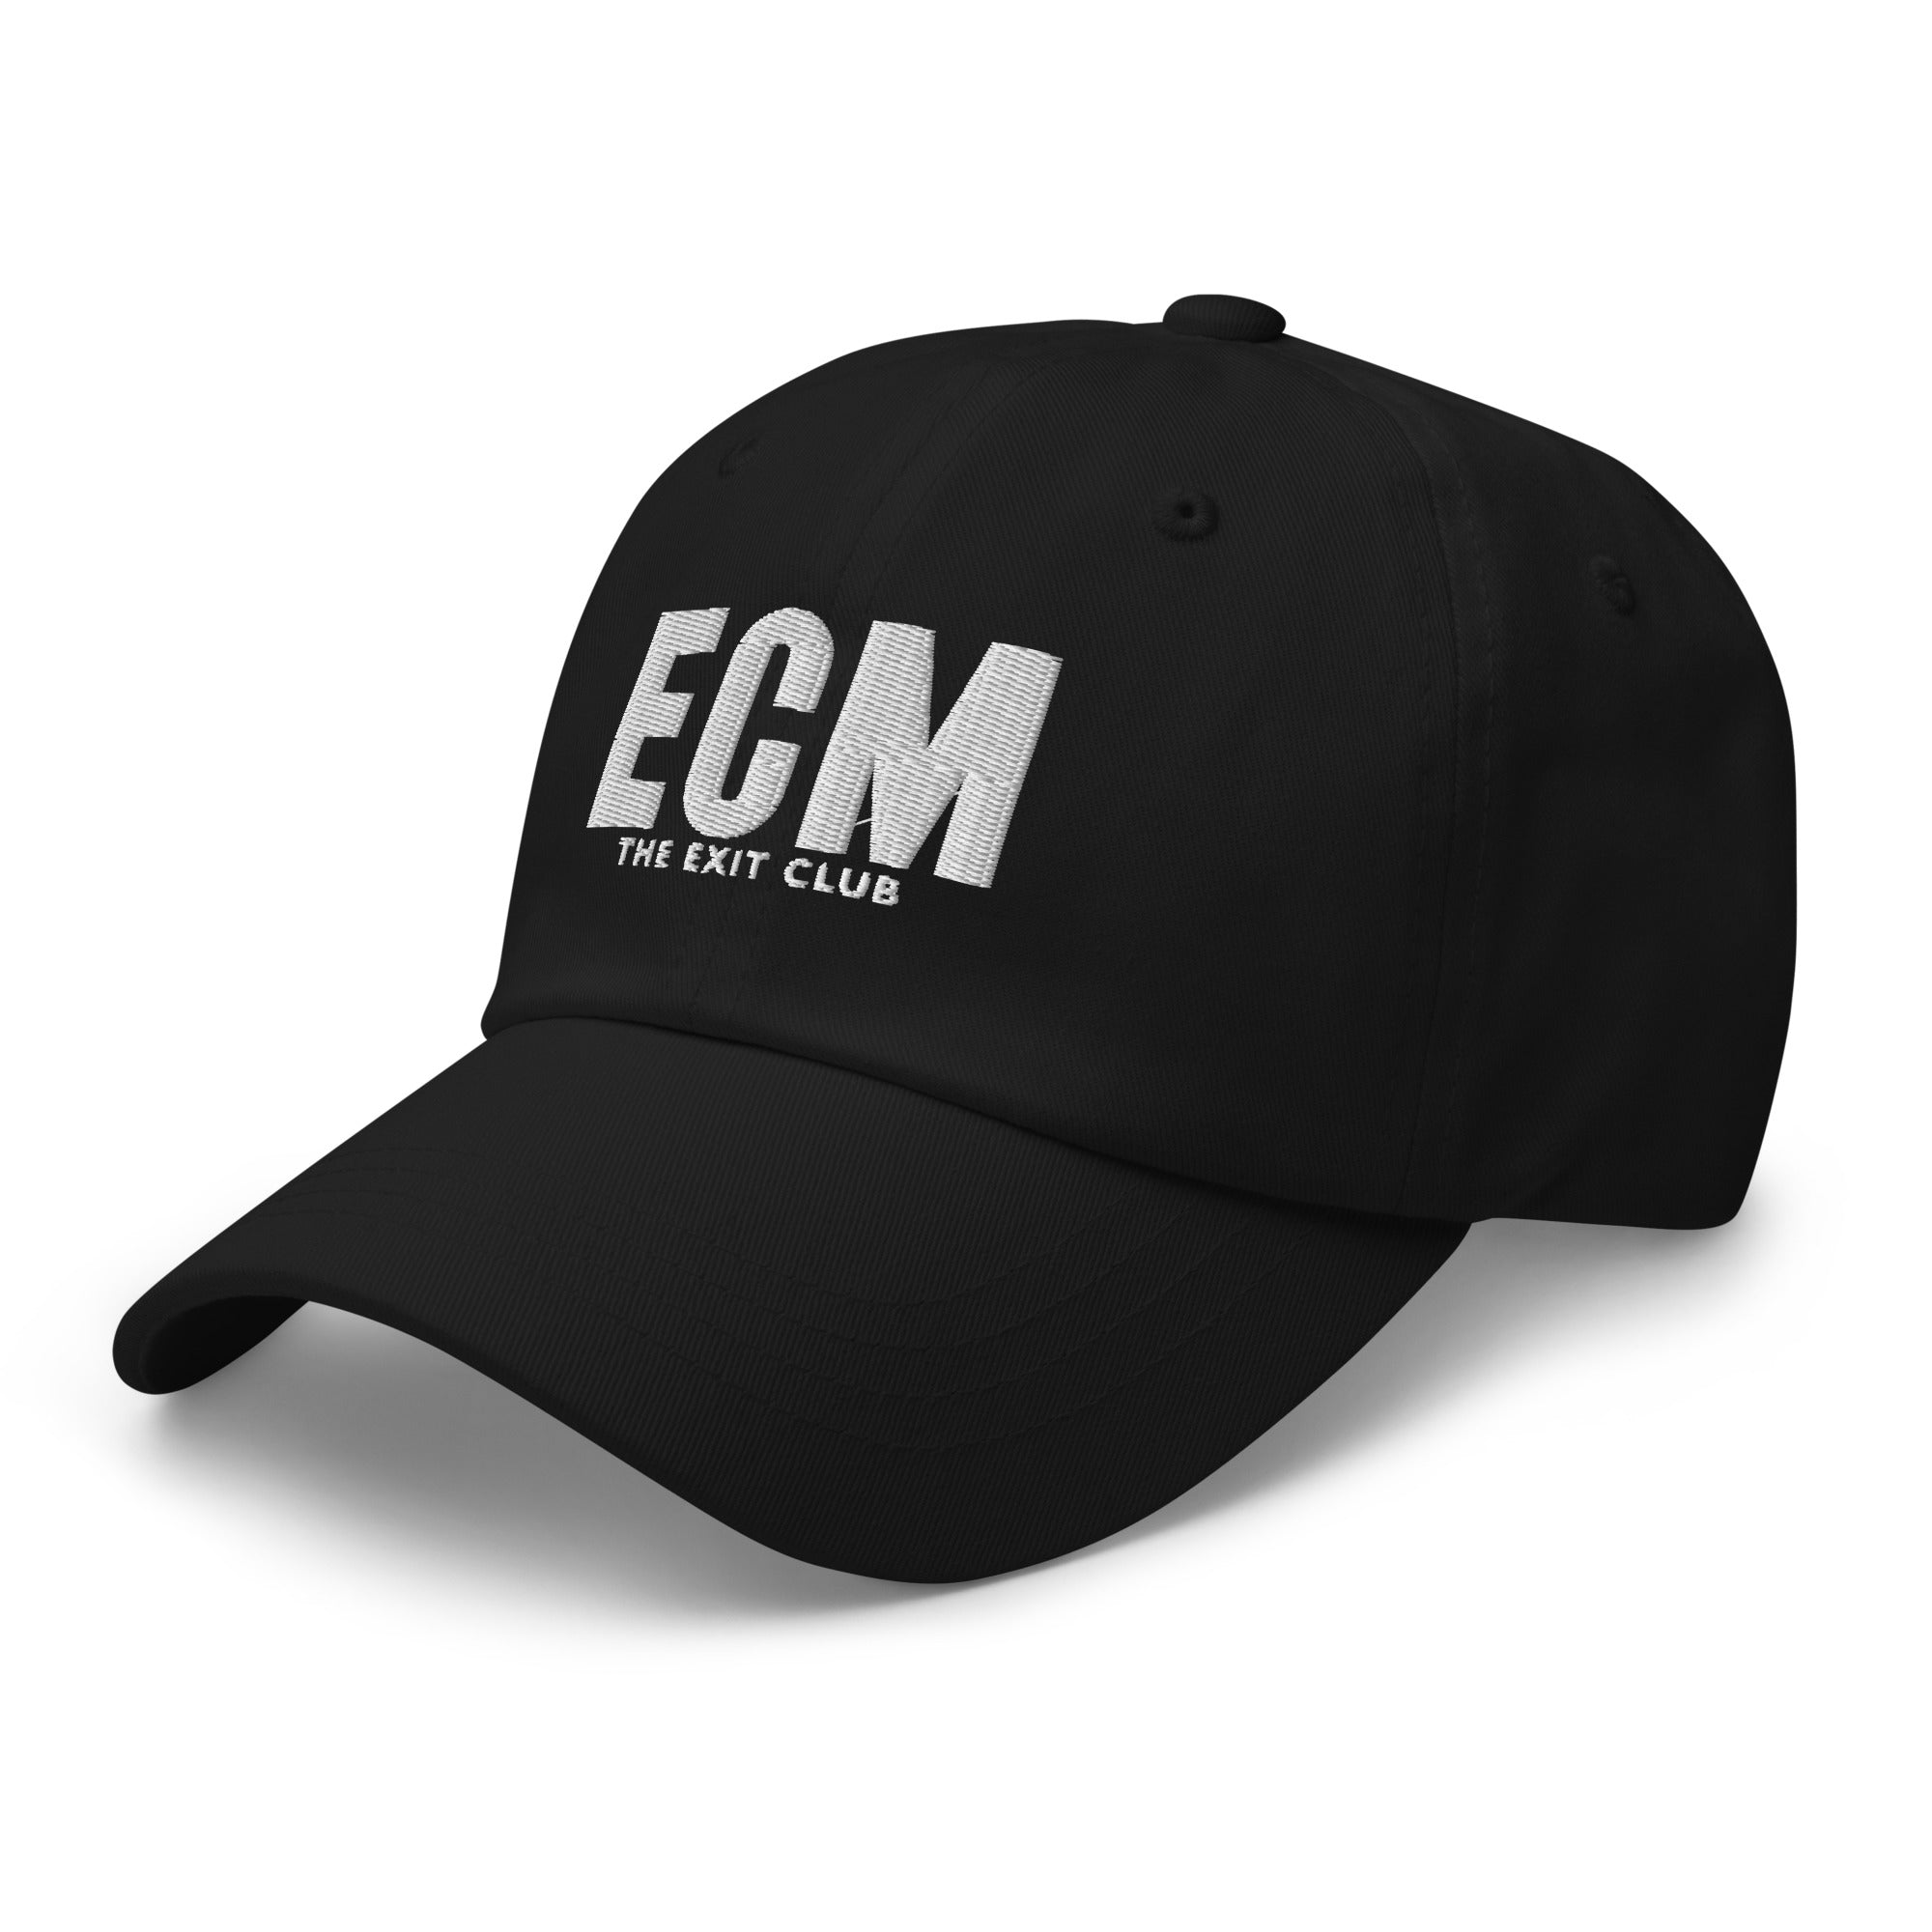 EQUITY CAPITAL MARKETS HAT